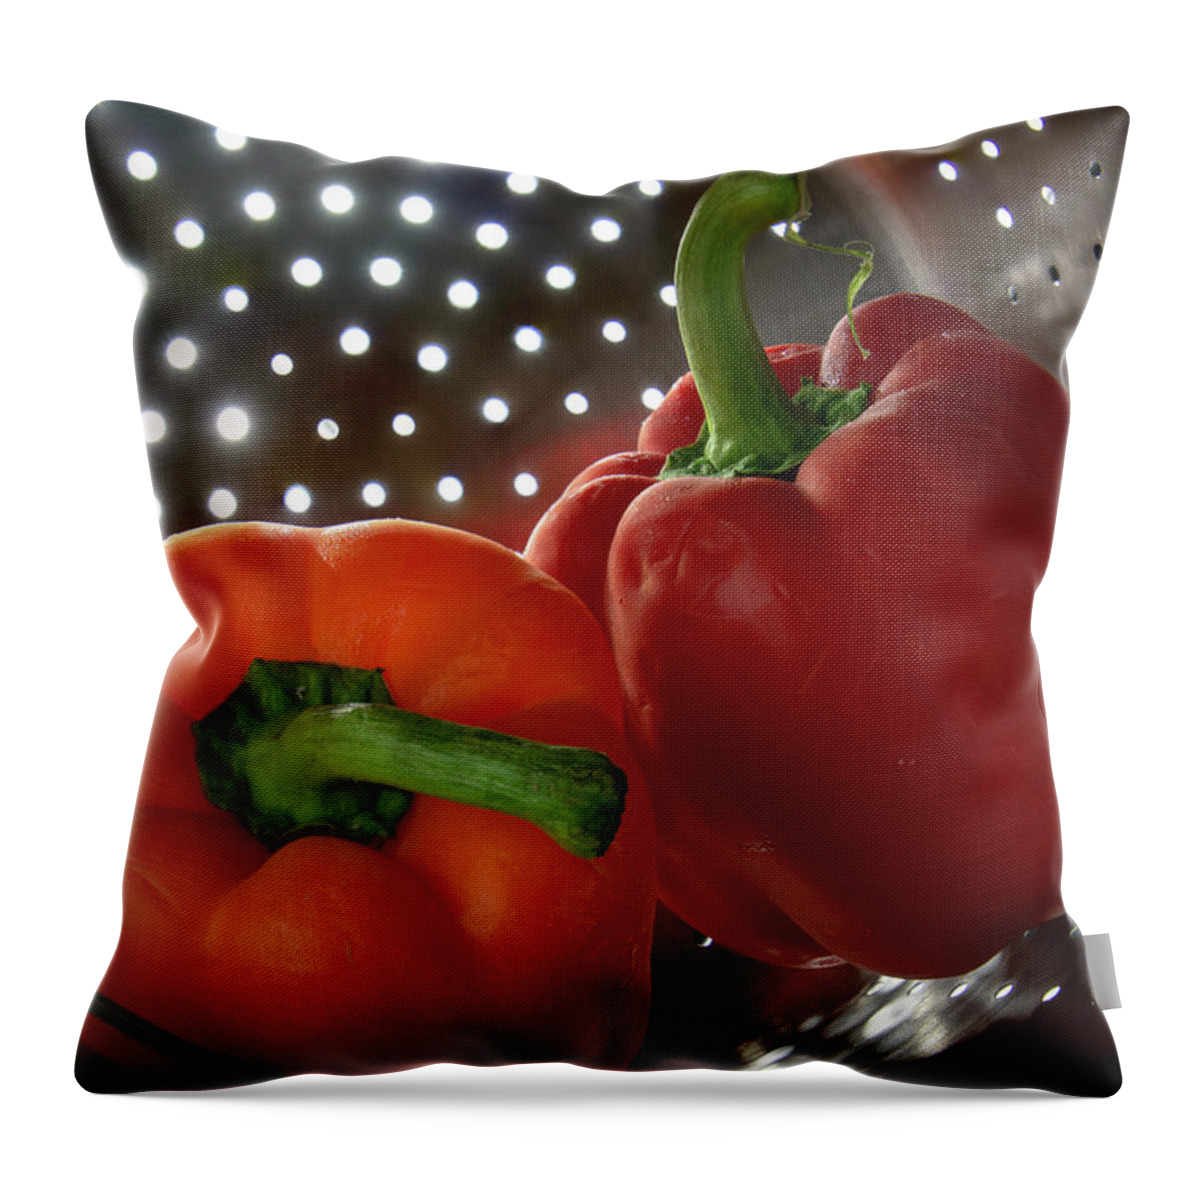 Pepper Throw Pillow featuring the photograph Peppers by Karen Smale